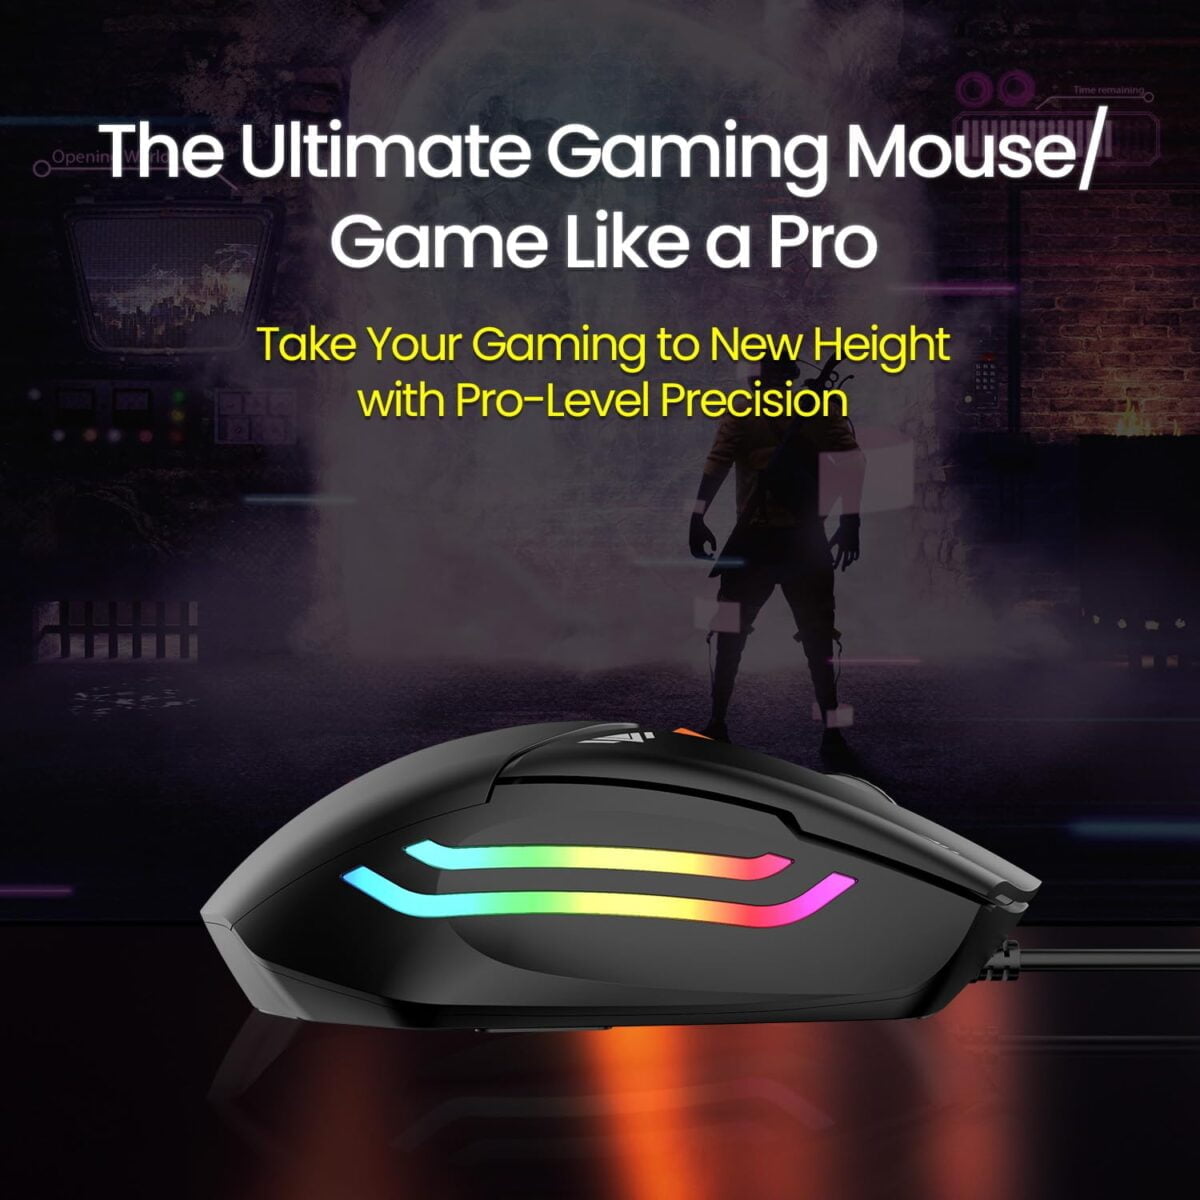 Portronics vader wired gaming mouse